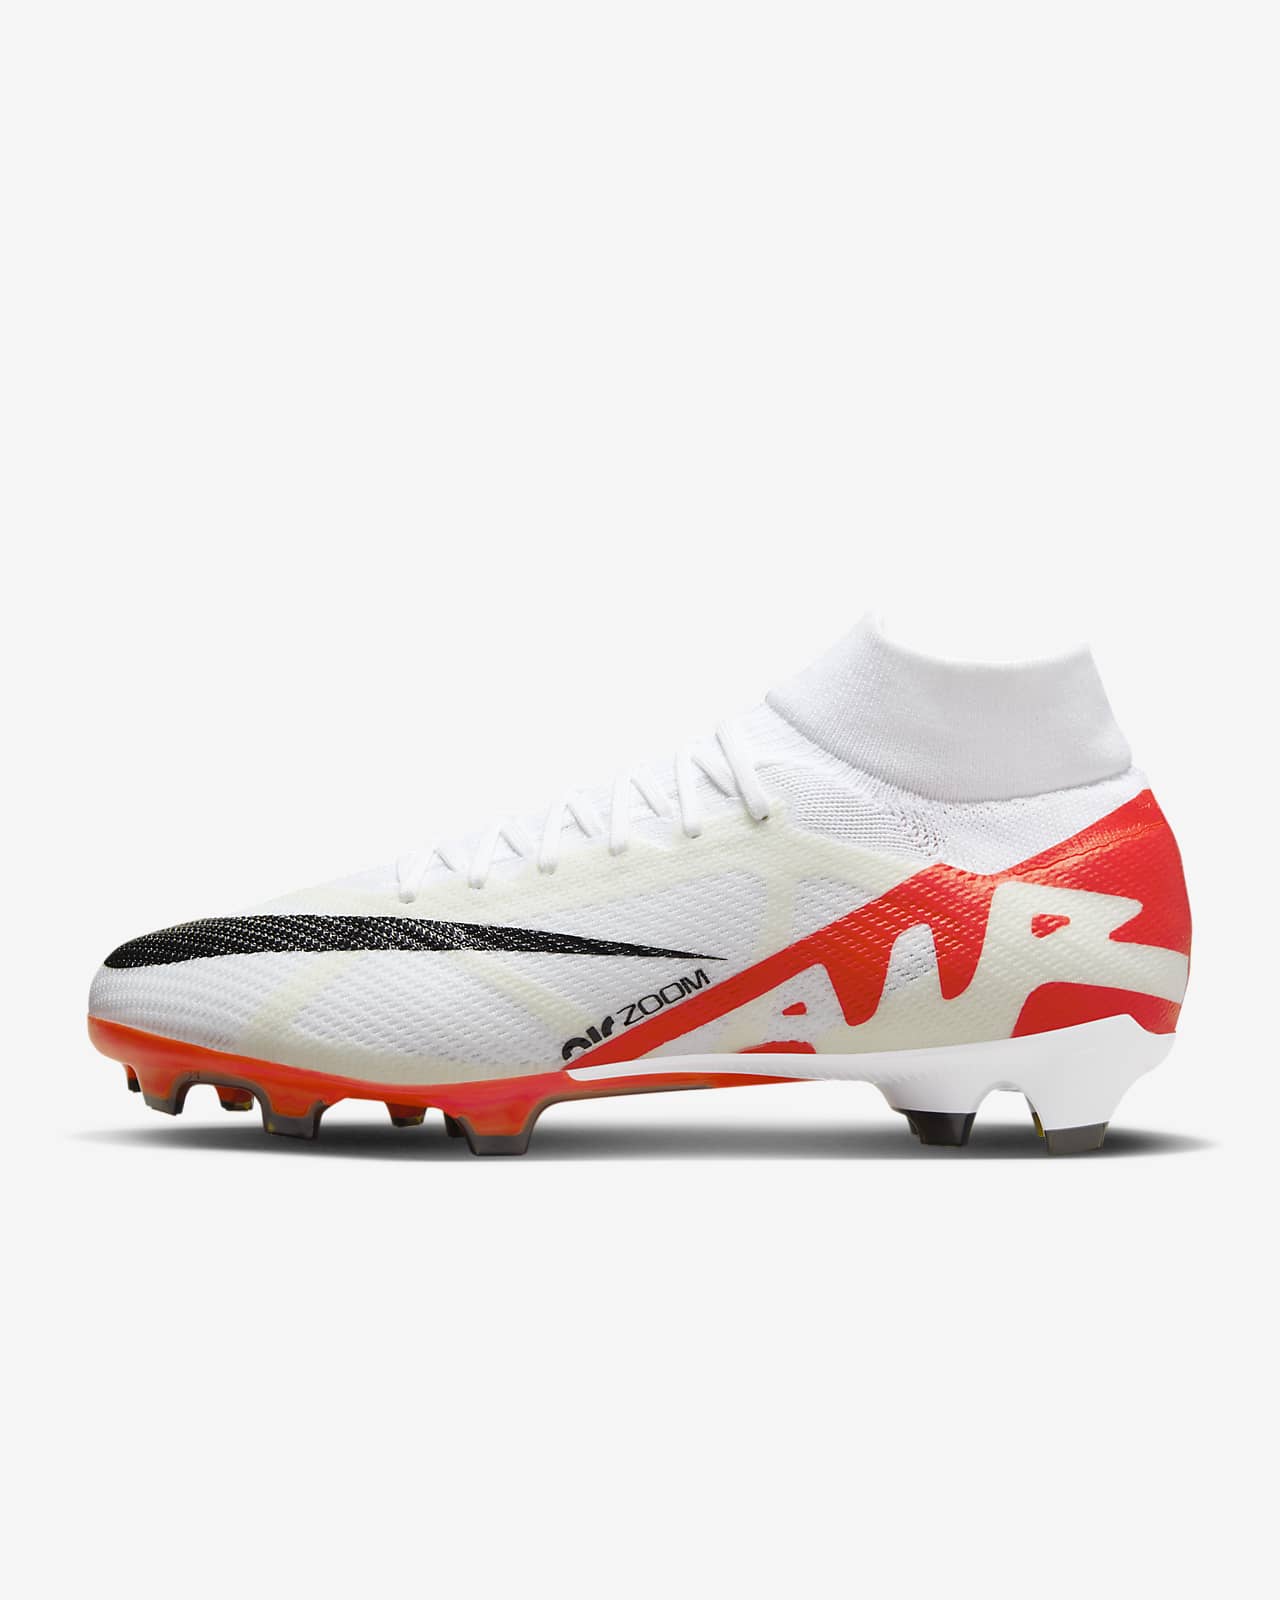 Nike Mercurial Superfly Pro Firm-Ground Football Boot.